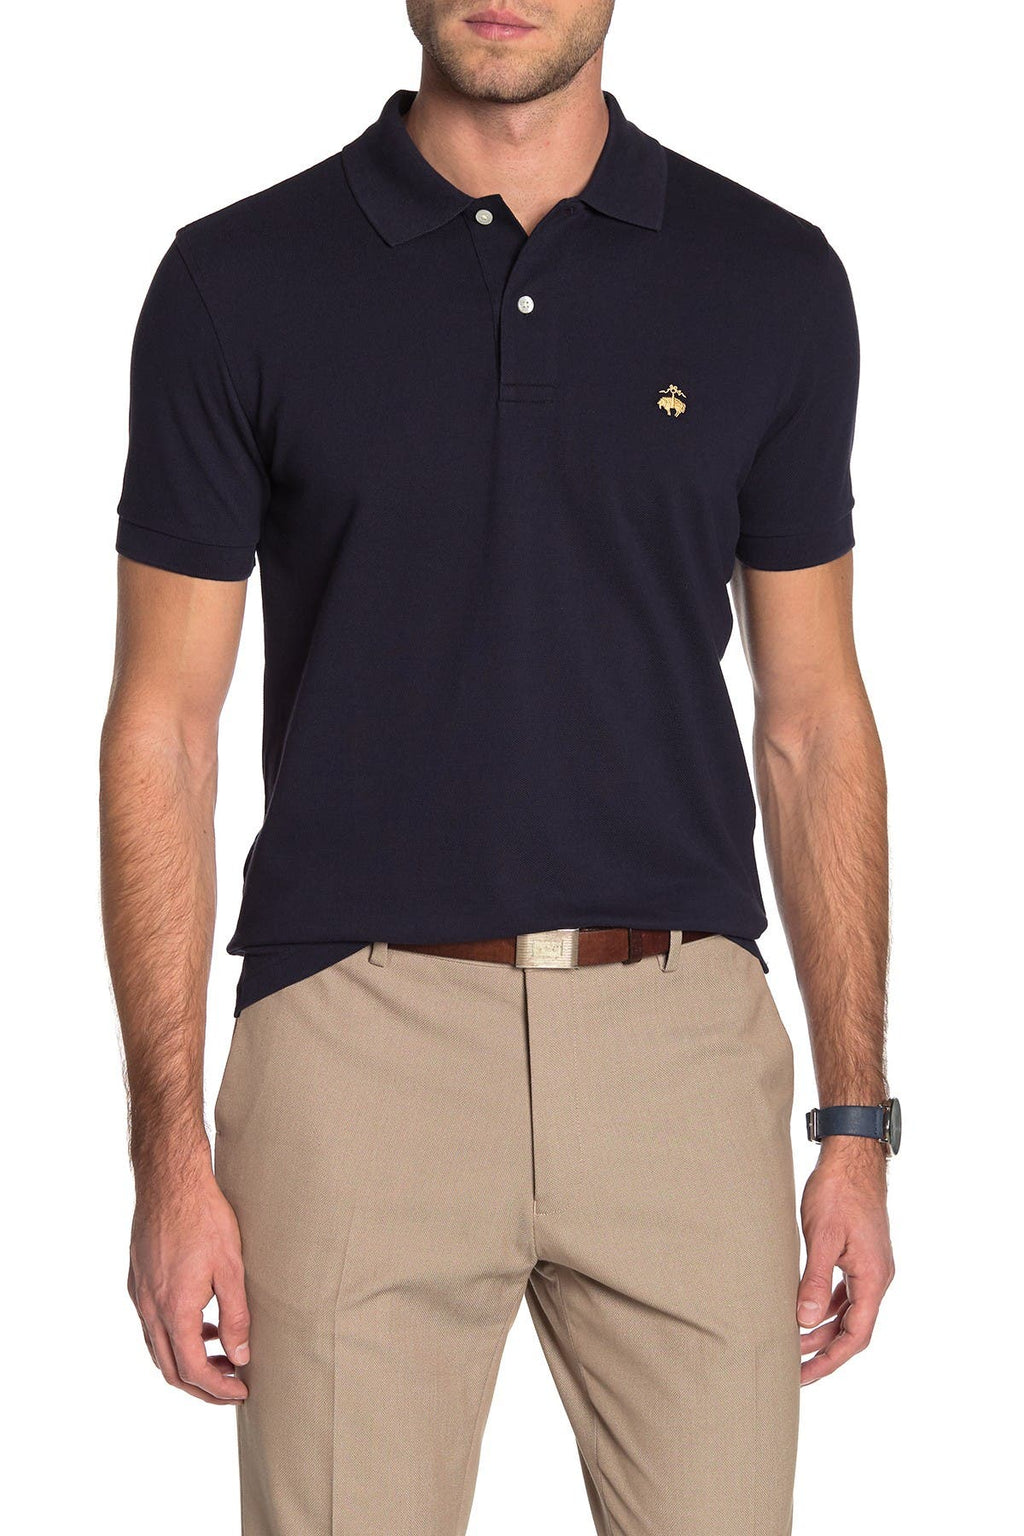 BROOKS BROTHERS Solid Piquè Slim Fit Polo, Main, color, NAVY